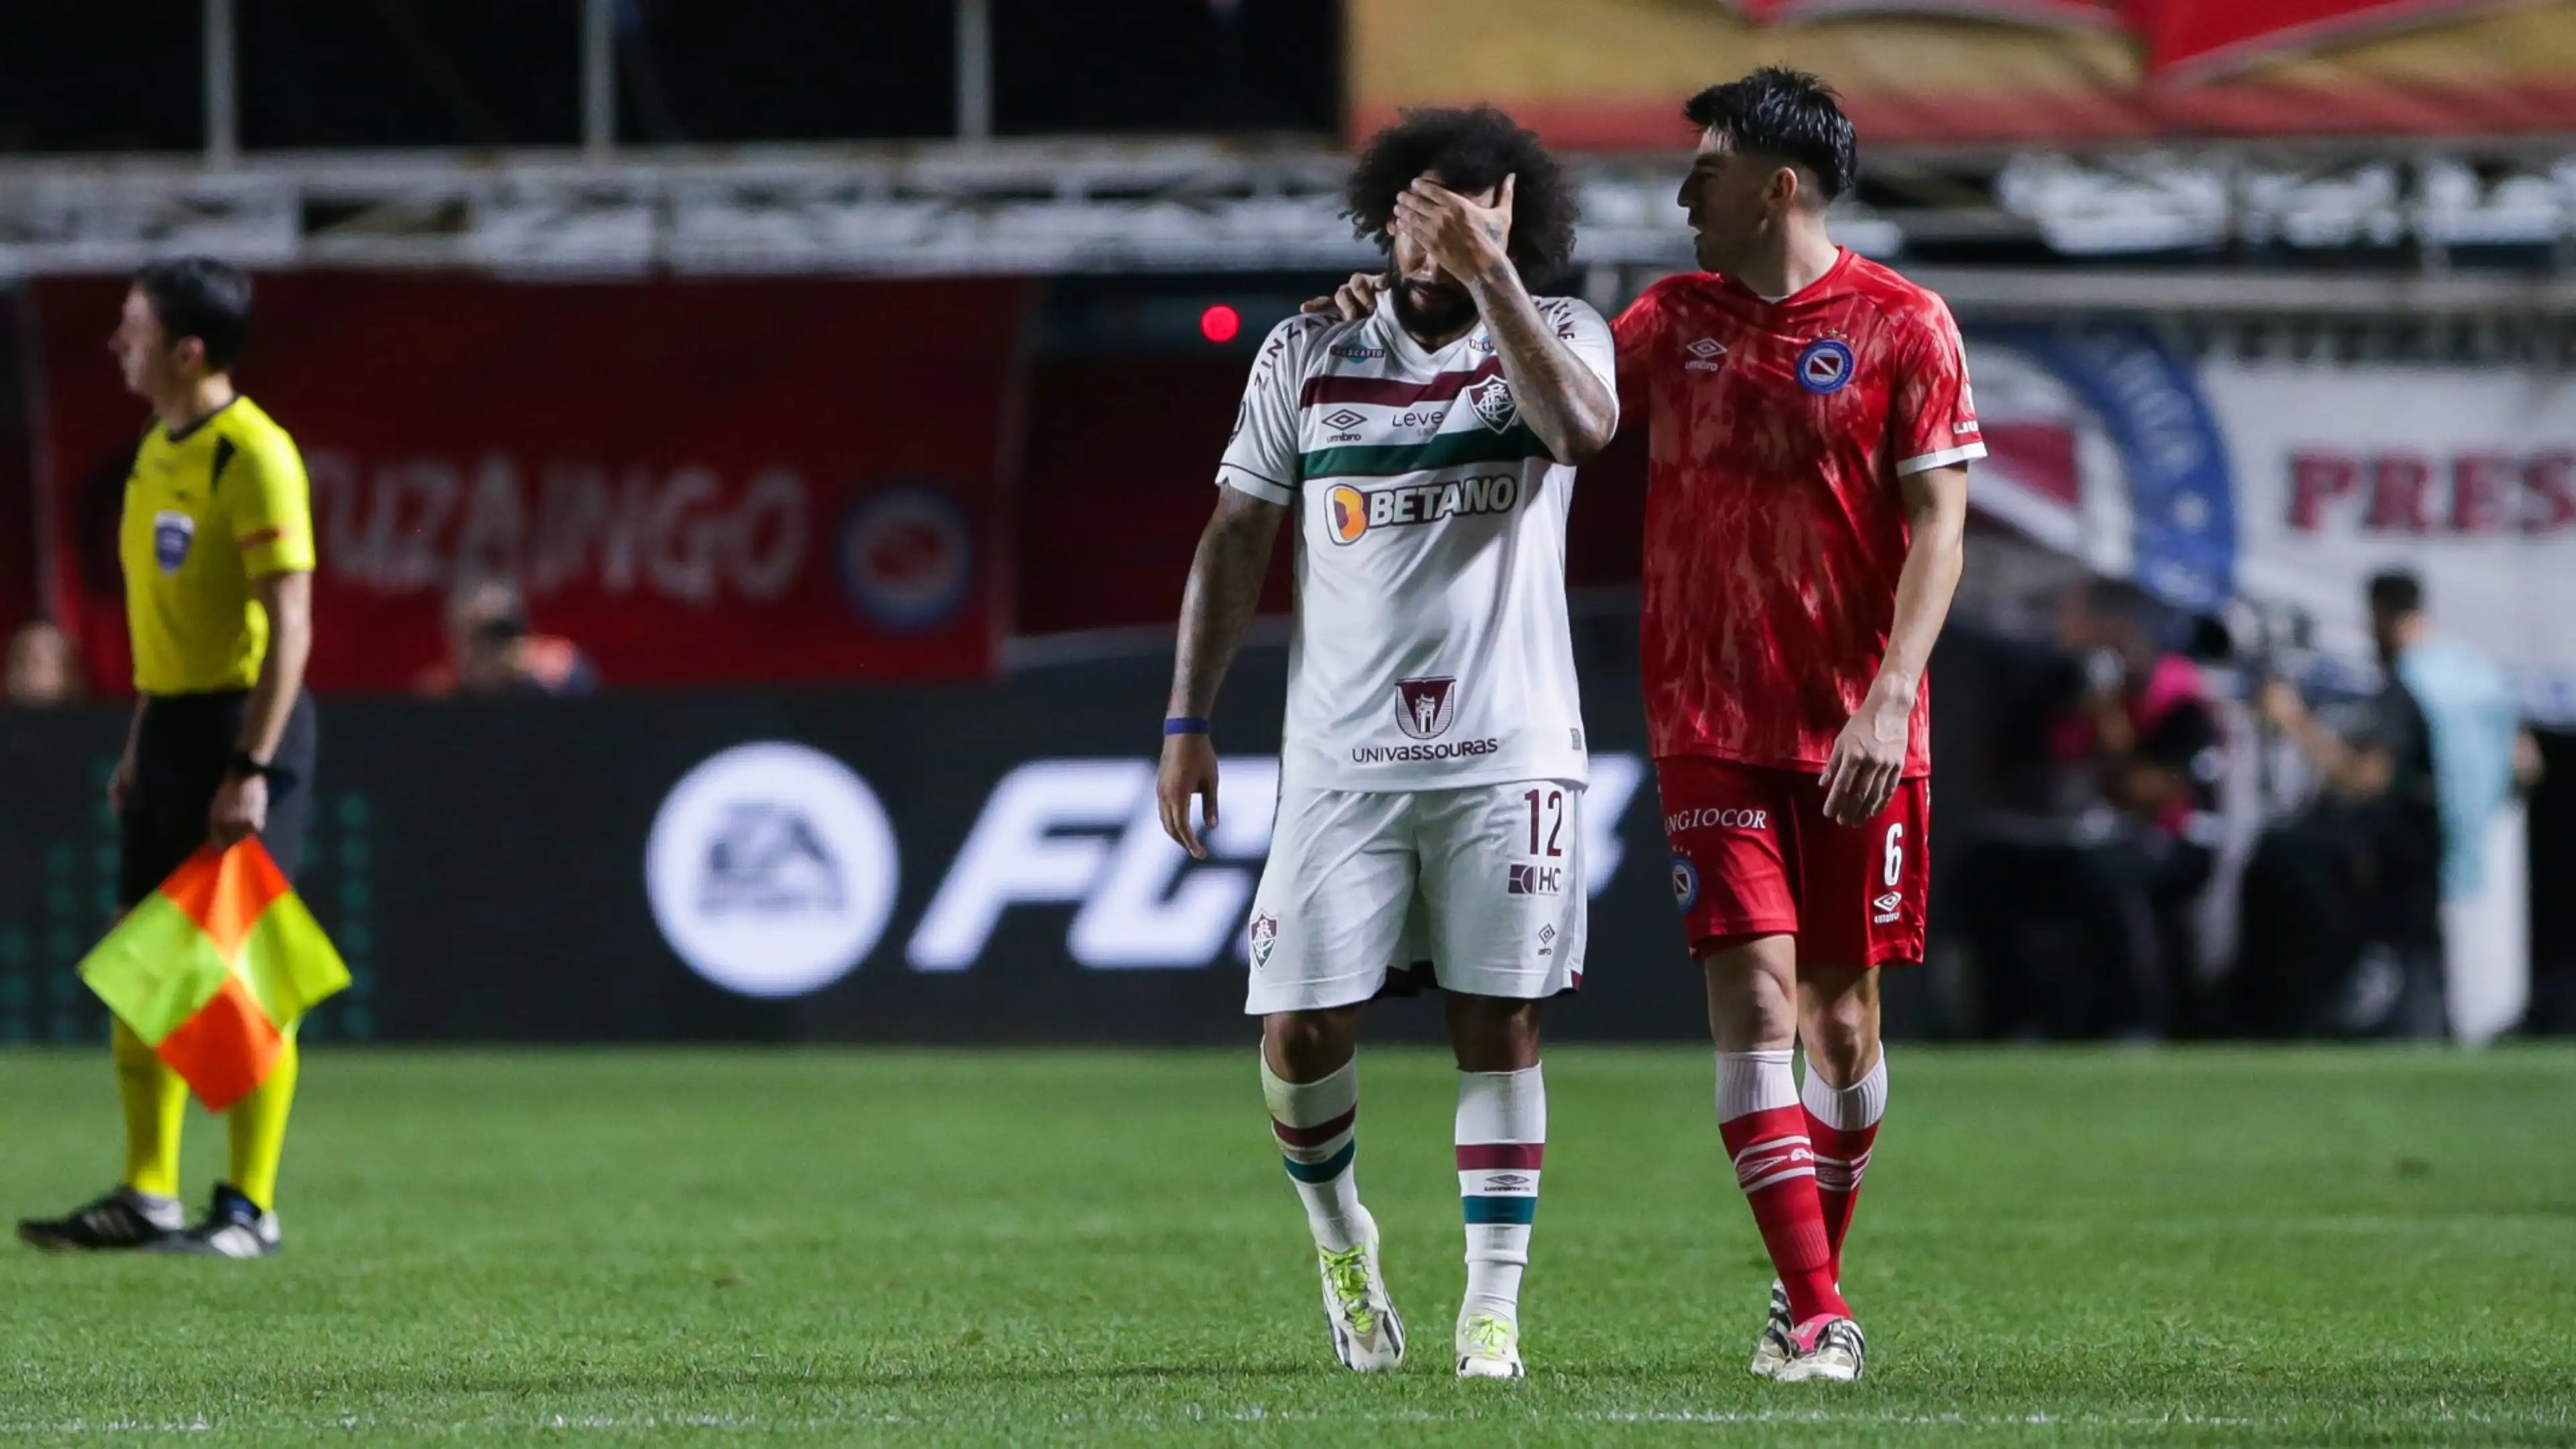 Former Real Madrid Defender Marcelo Breaks Opponent's Leg During Libertadores Cup Match